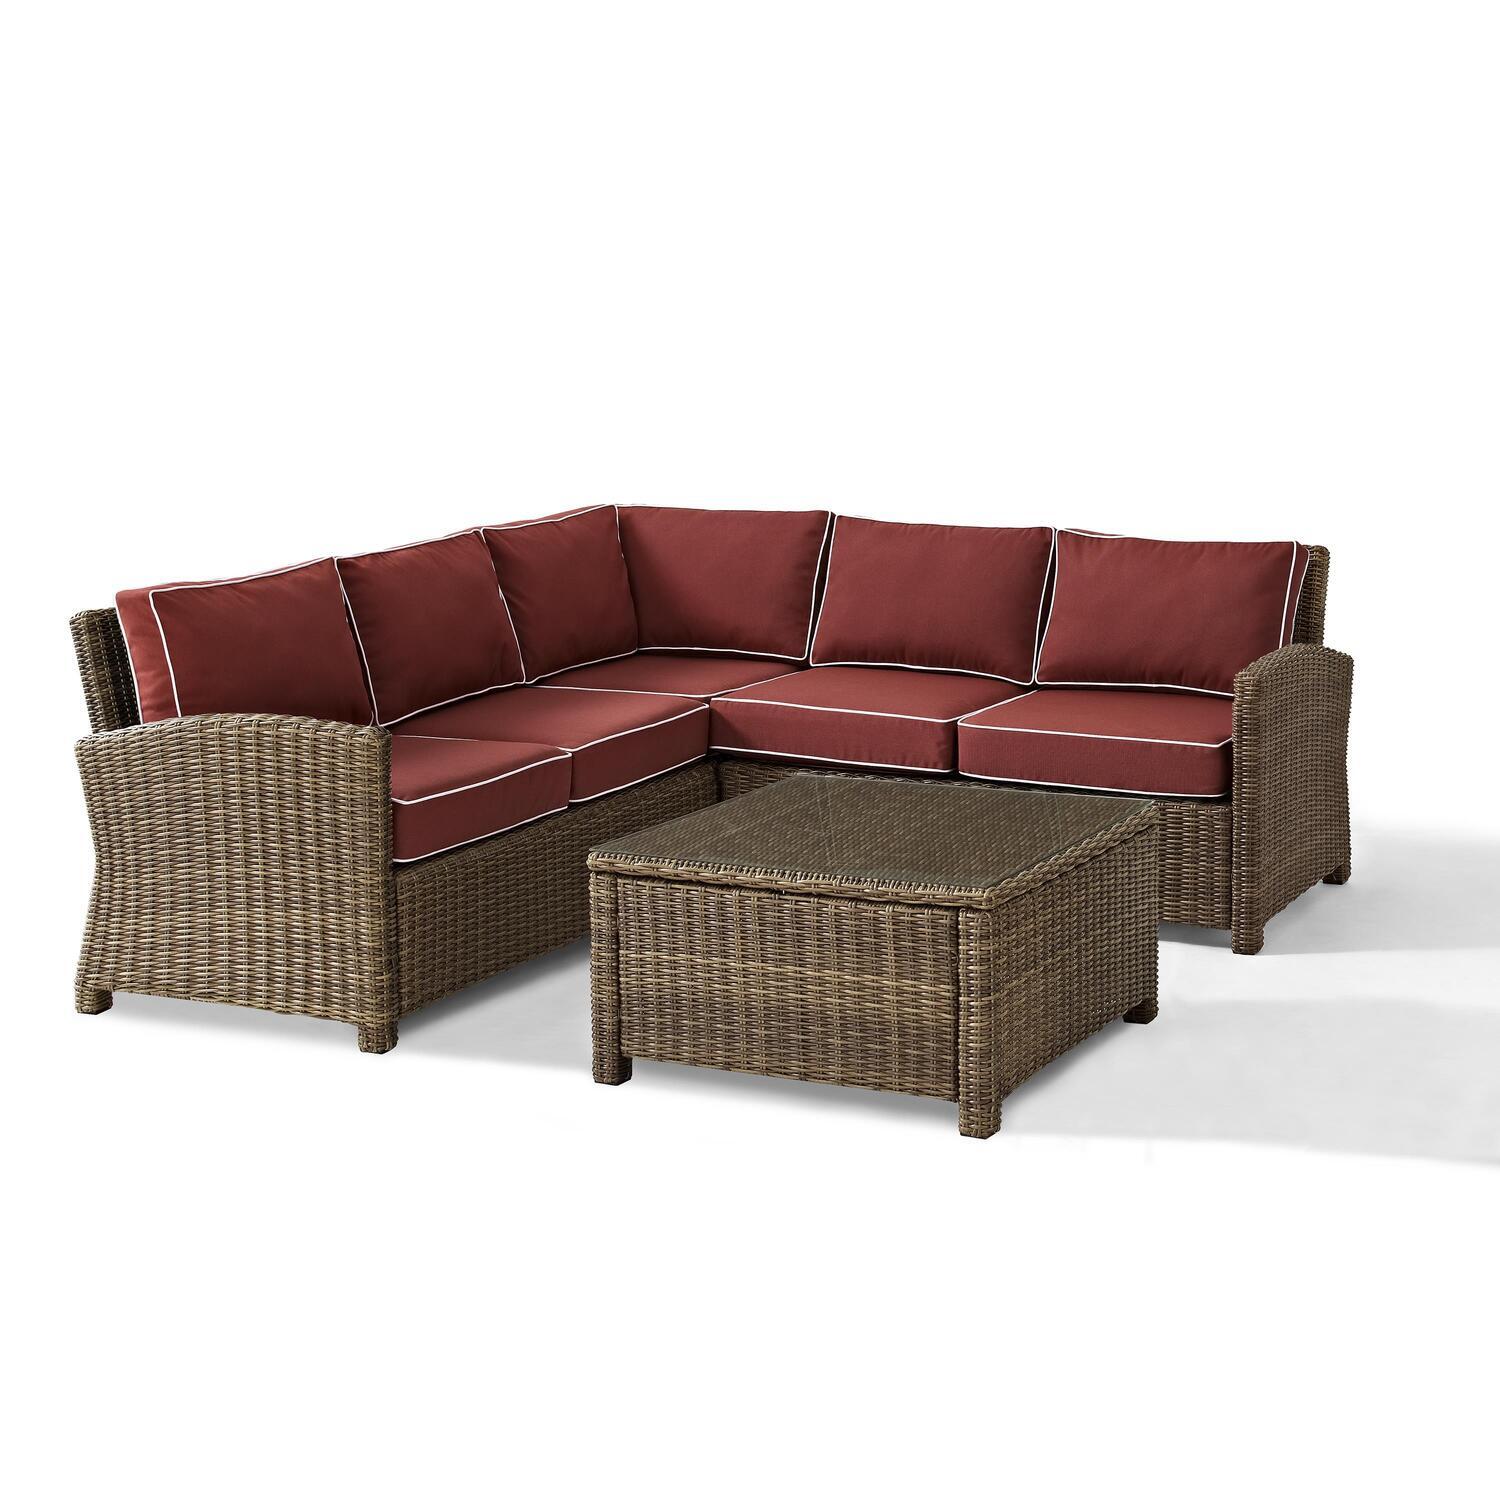 Crosley Furniture Bradenton 4-Piece Outdoor Wicker Seating Set with Sangria Cushions - Right Corner Loveseat, Left Corner Loveseat, Corner Chair, Sectional Glass Top Coffee Table - image 1 of 10